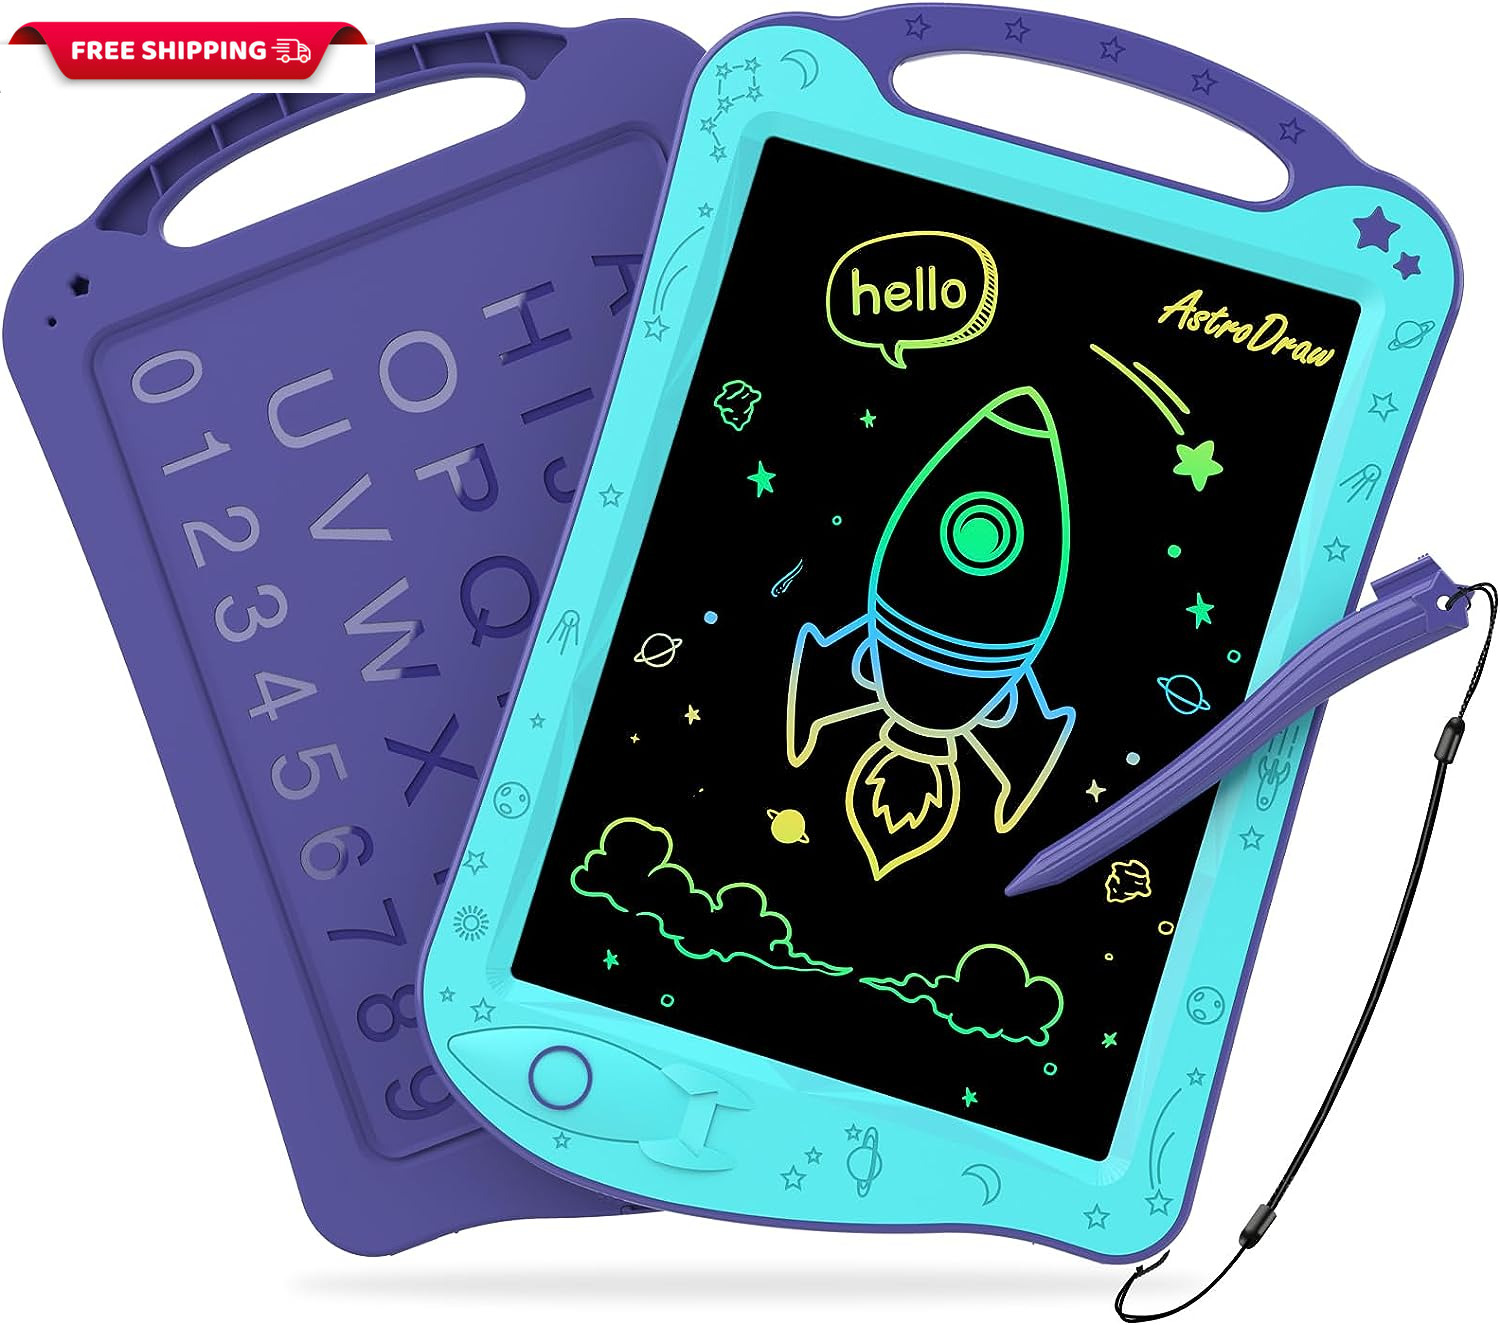 Astrodraw Drawing Pad Toys, Colorful LCD Writing Tablet for Kids, Doodle Board f